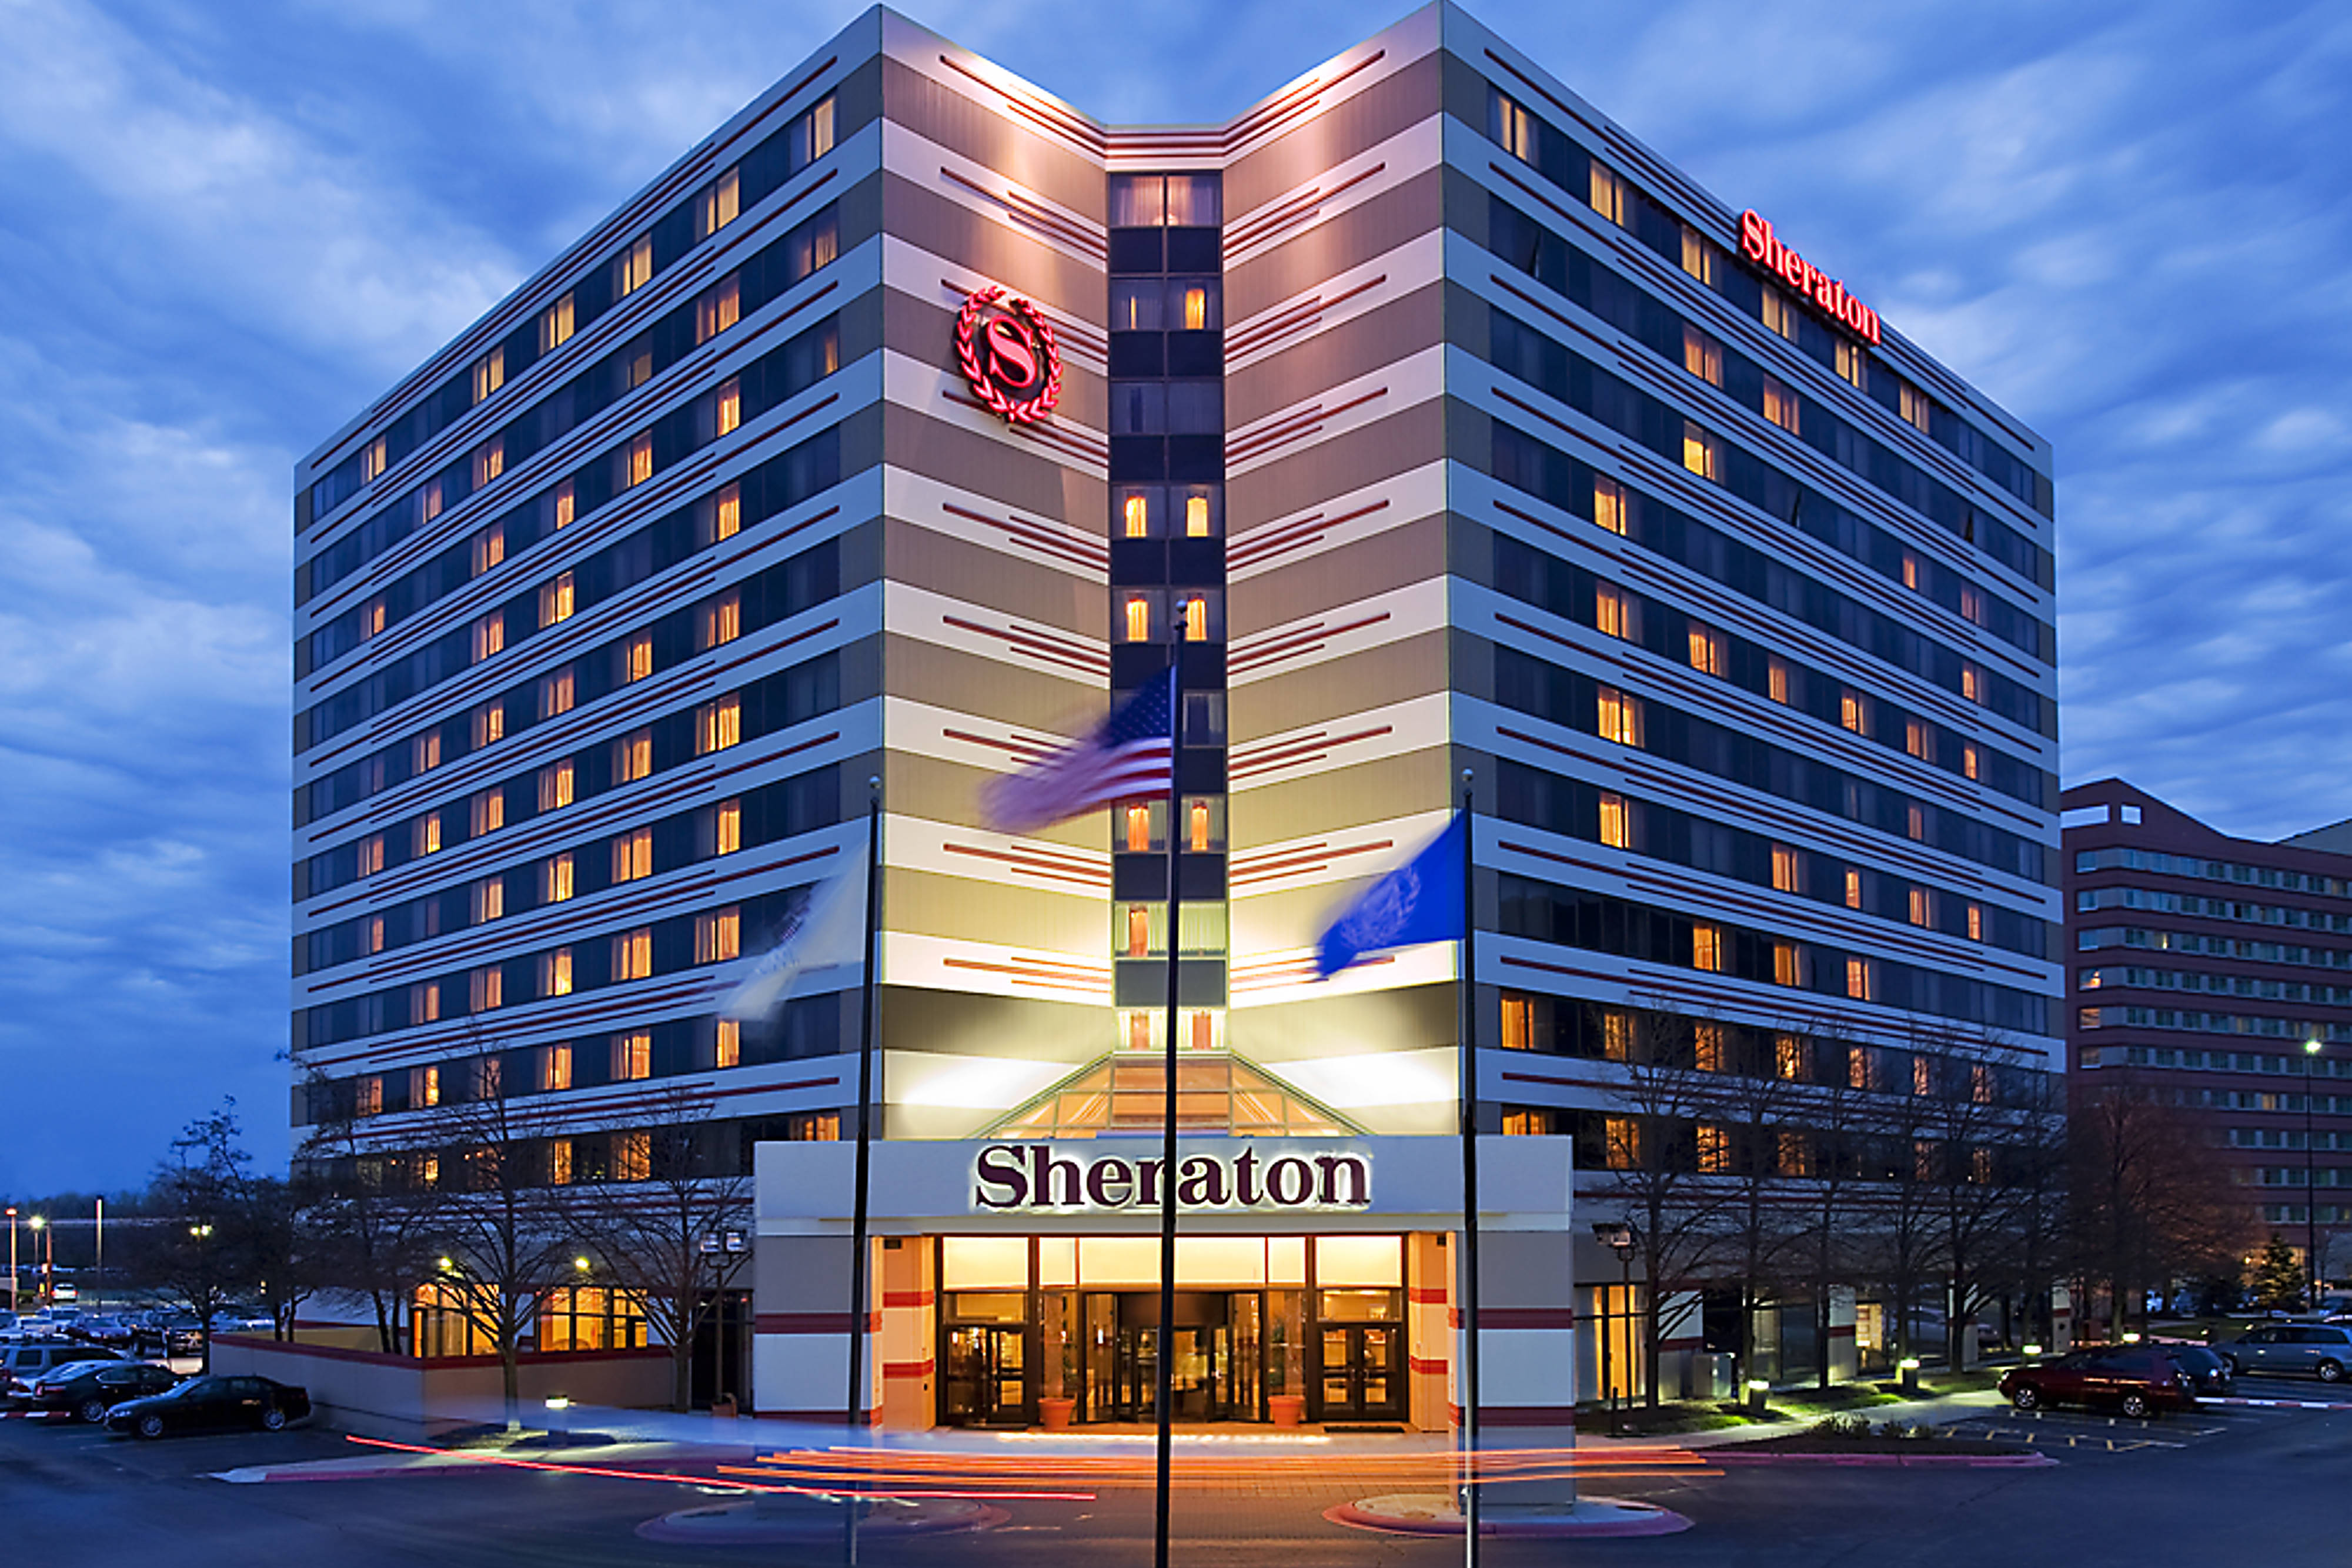 Photo of Sheraton Suites Chicago O'Hare, Rosemont, IL